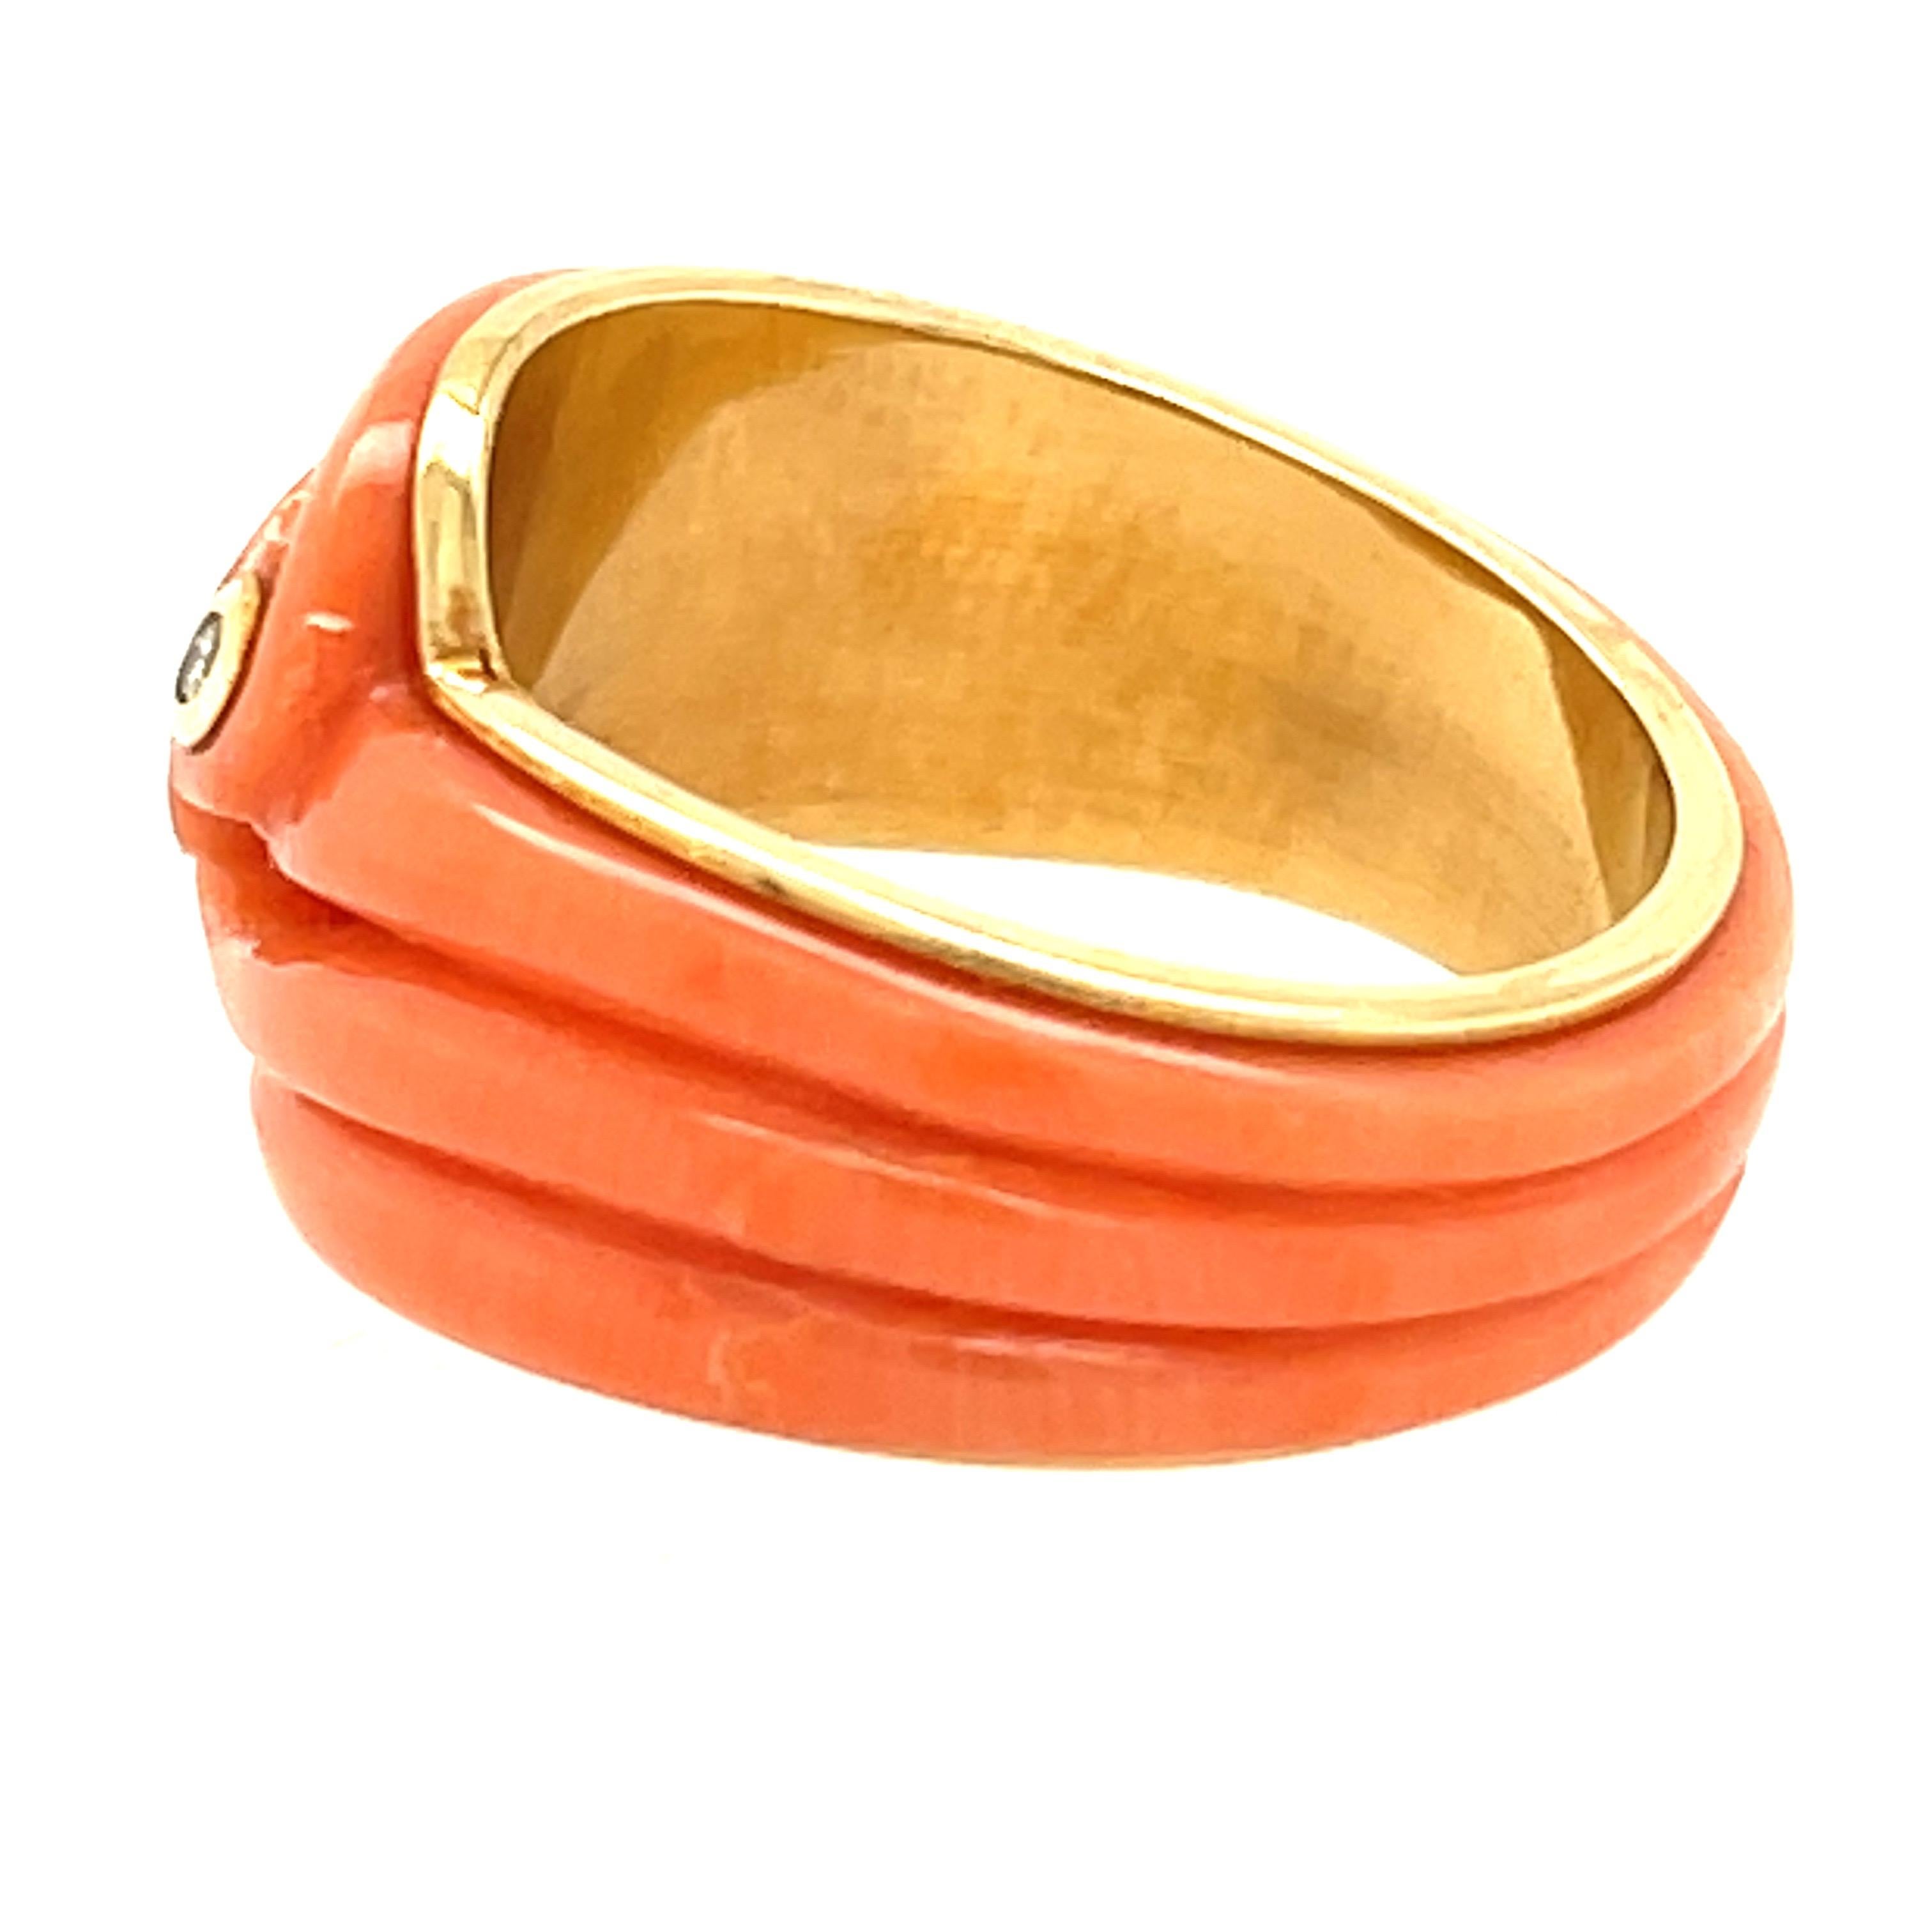 A charming wave themed carved coral 18k yellow gold band ring, circa 2000. This ring is charming and well made without a seam meaning a piece of coral was to make the ring. It has great flow and is smooth and feels good to the touch. The ring has